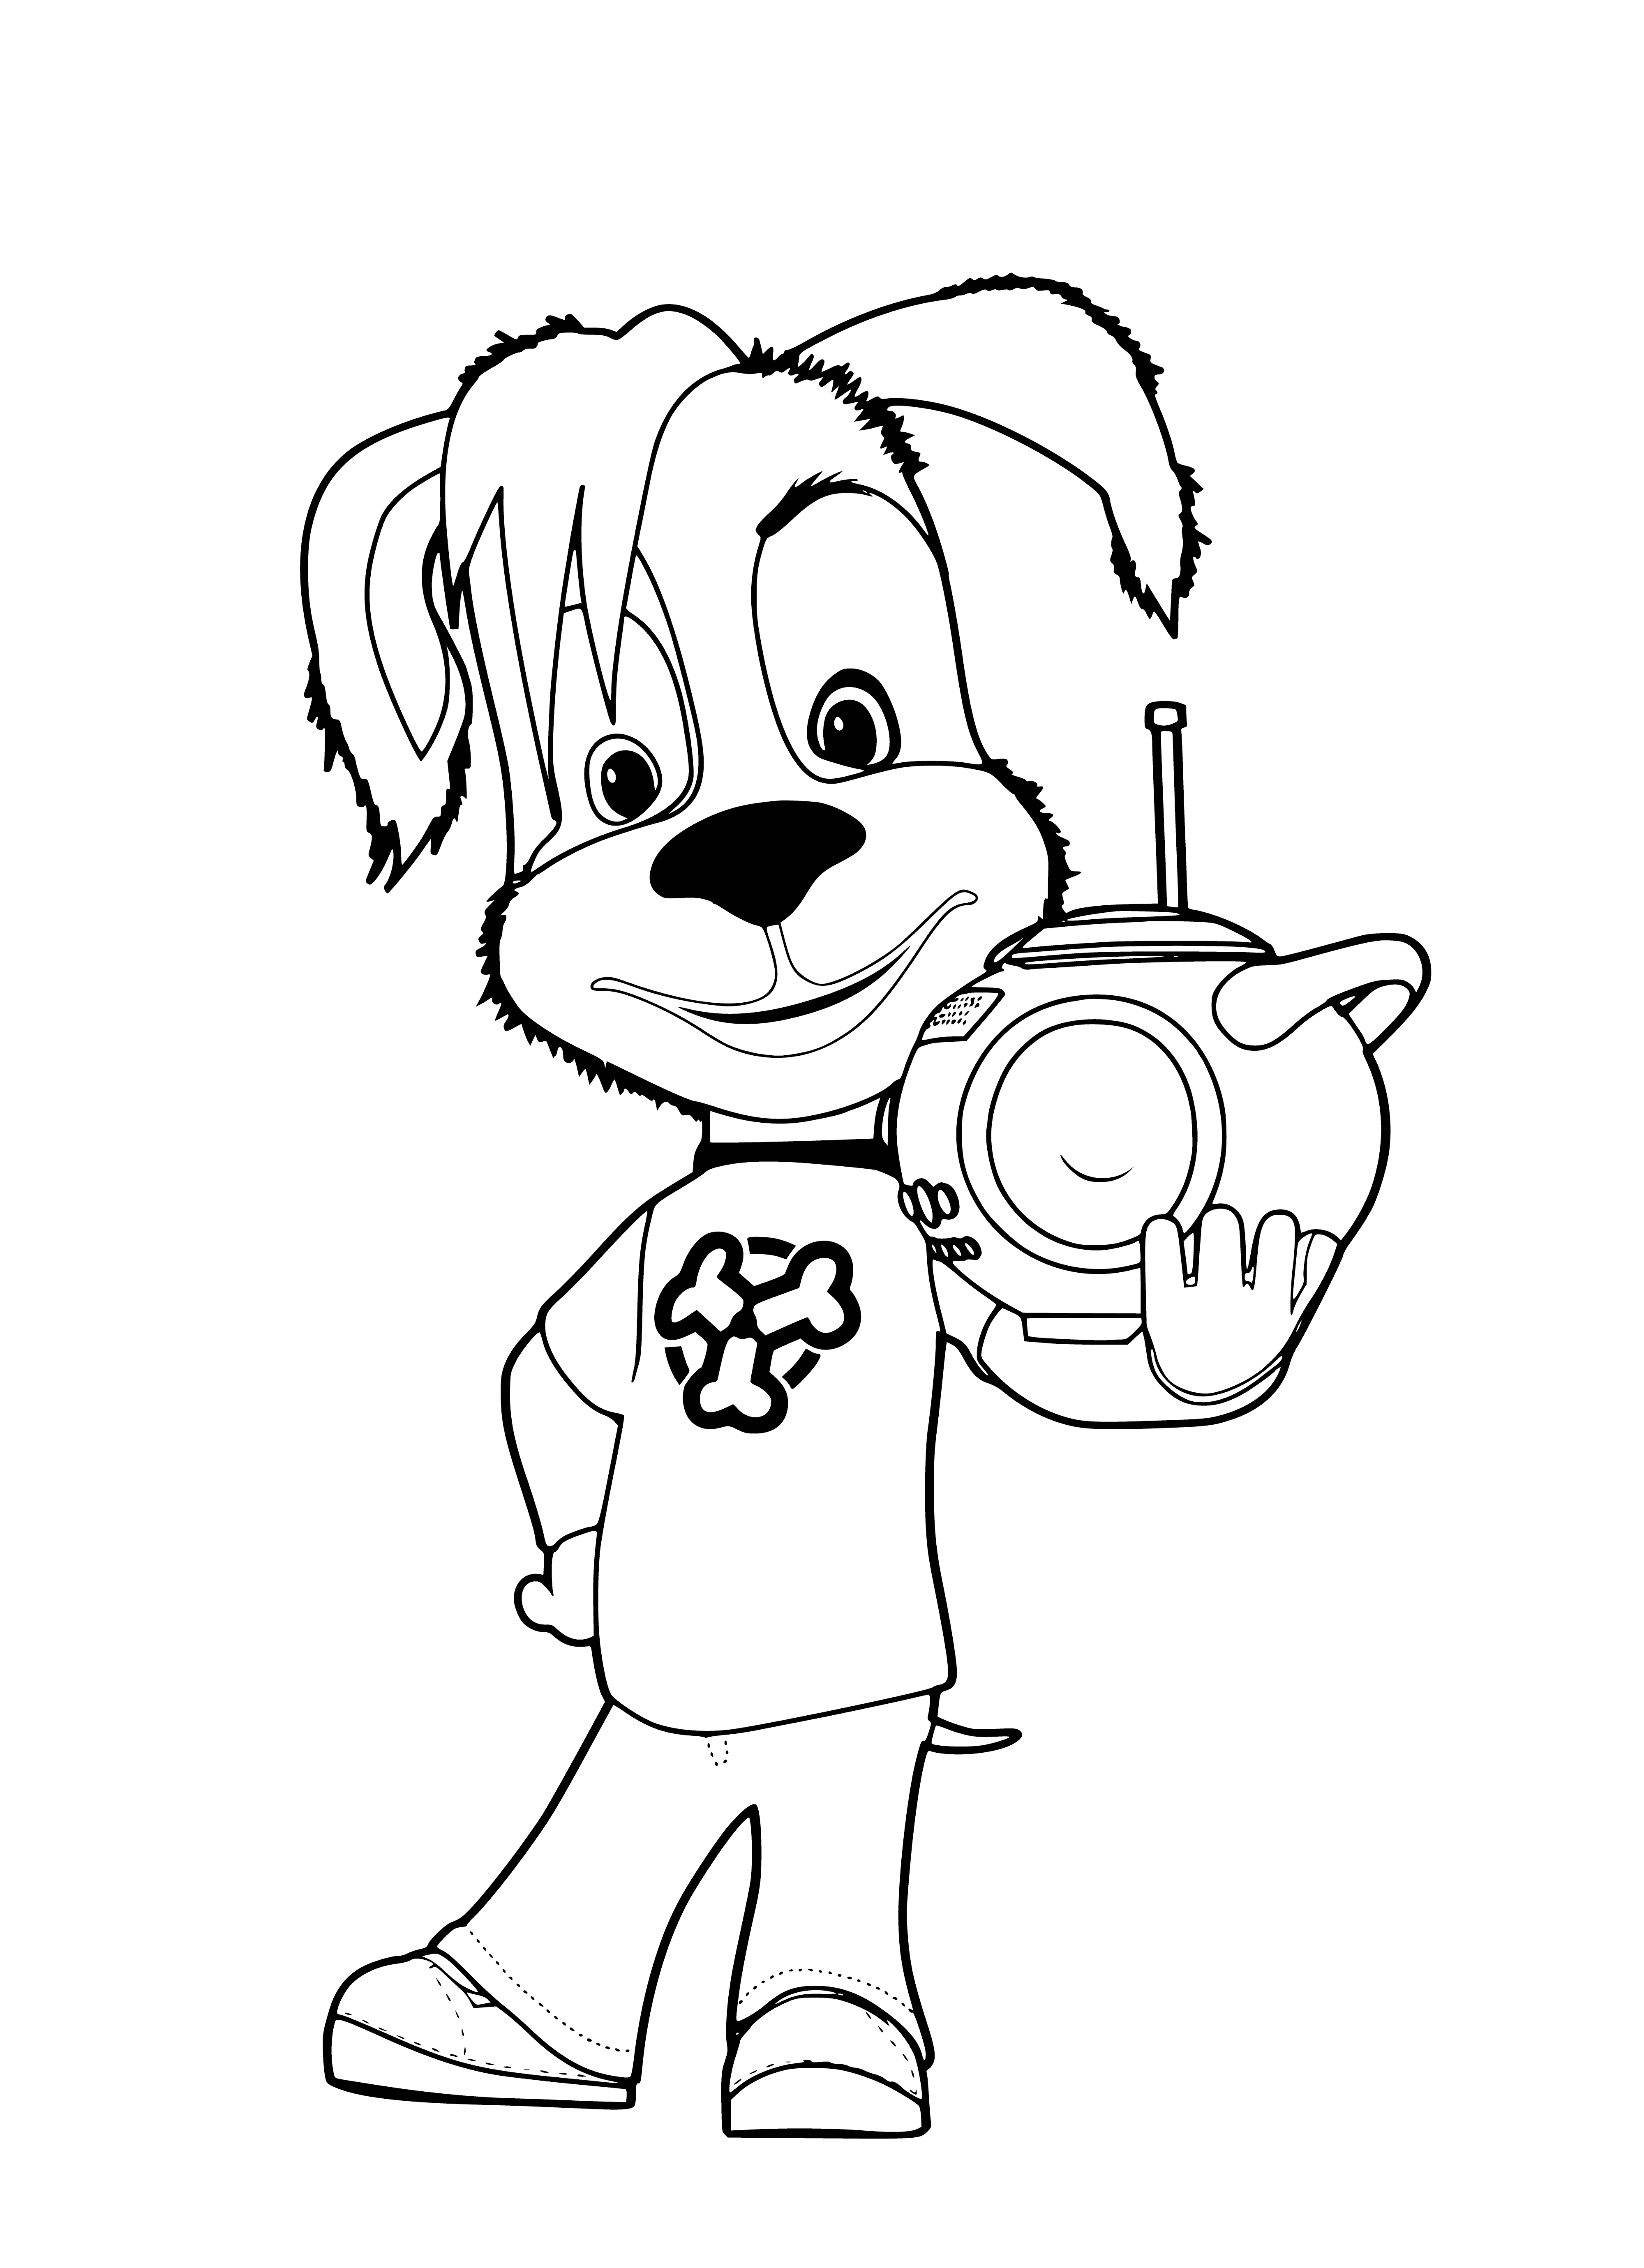 Boombox buddy coloring page